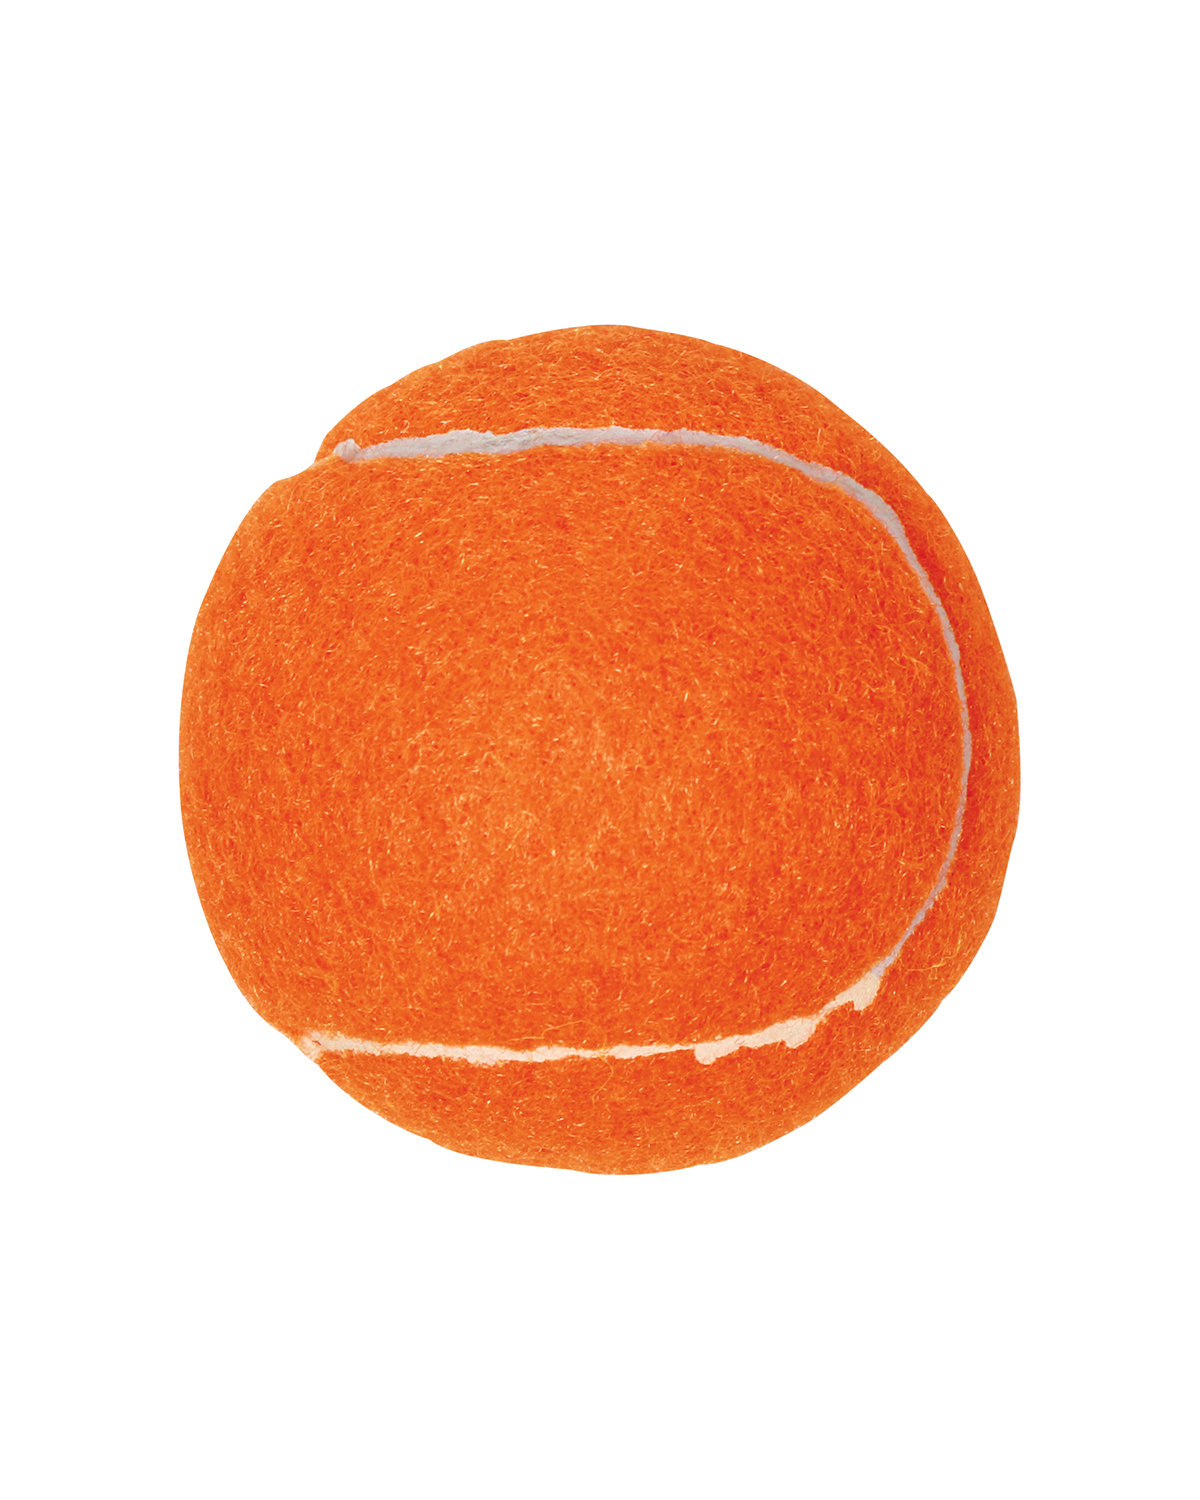 Prime Line Synthetic Promotional Tennis Ball orange 